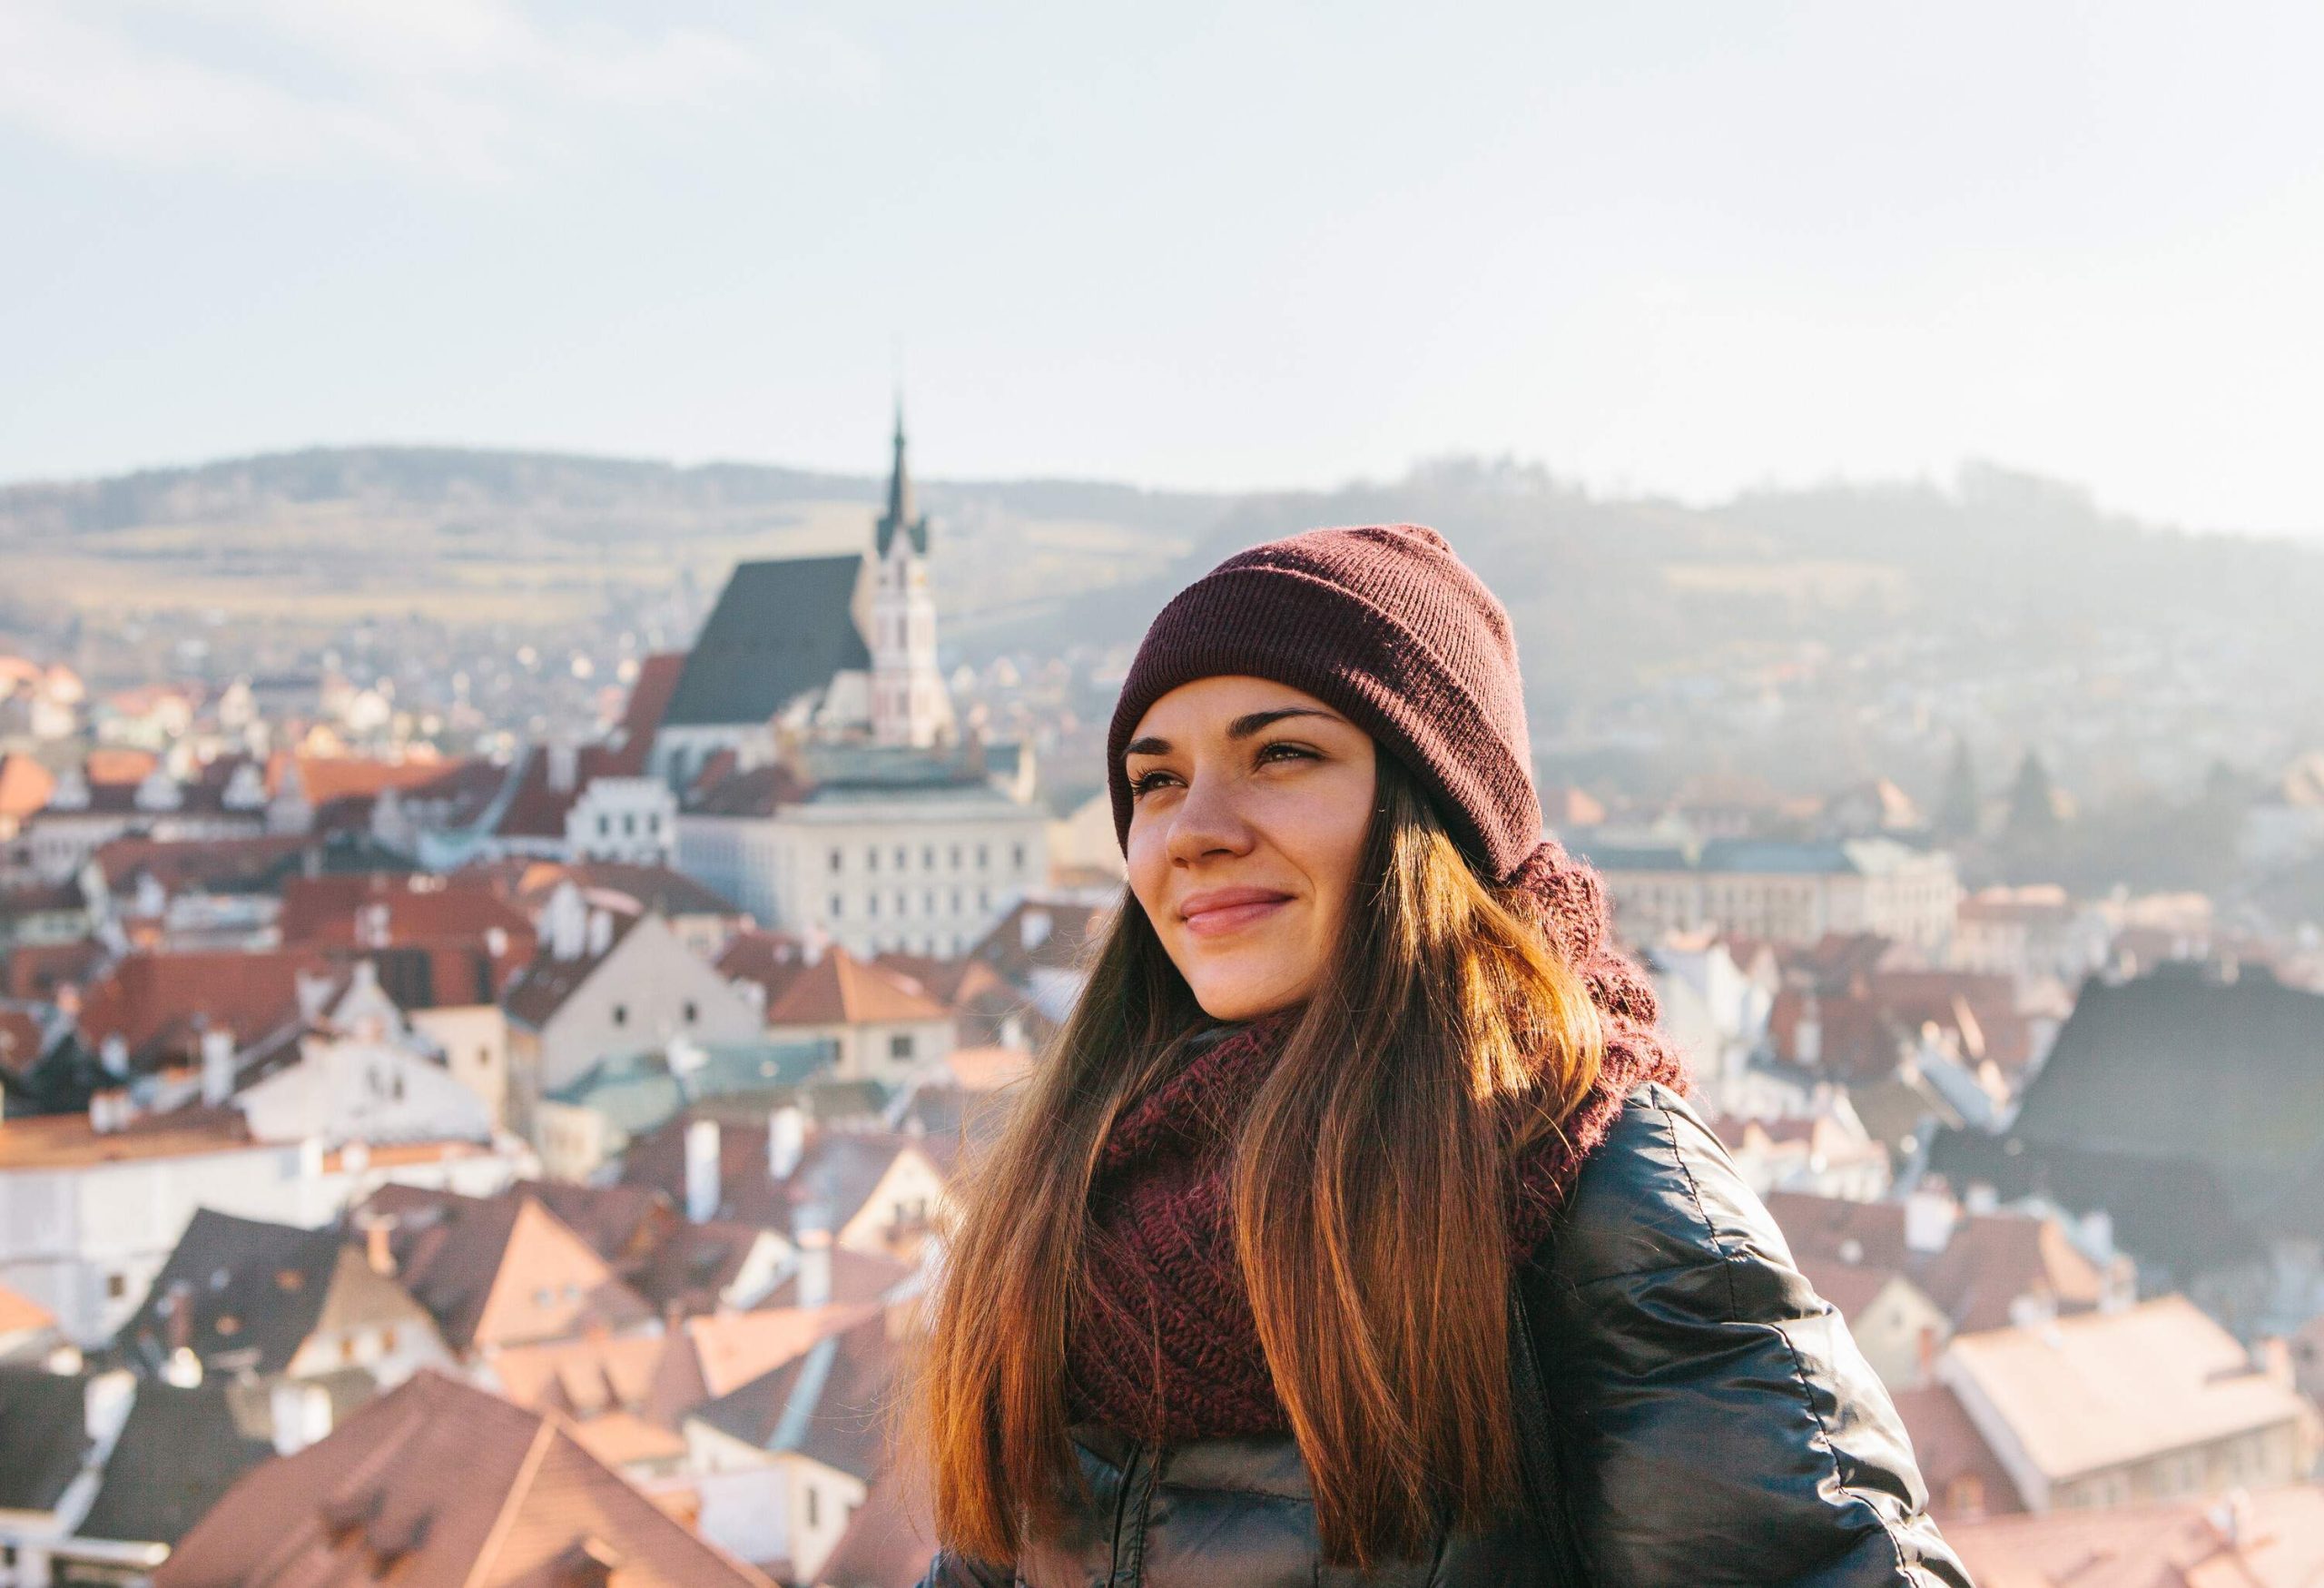 A smiling brunette girl in a bonnet and winter attire against the backdrop of a townscape.